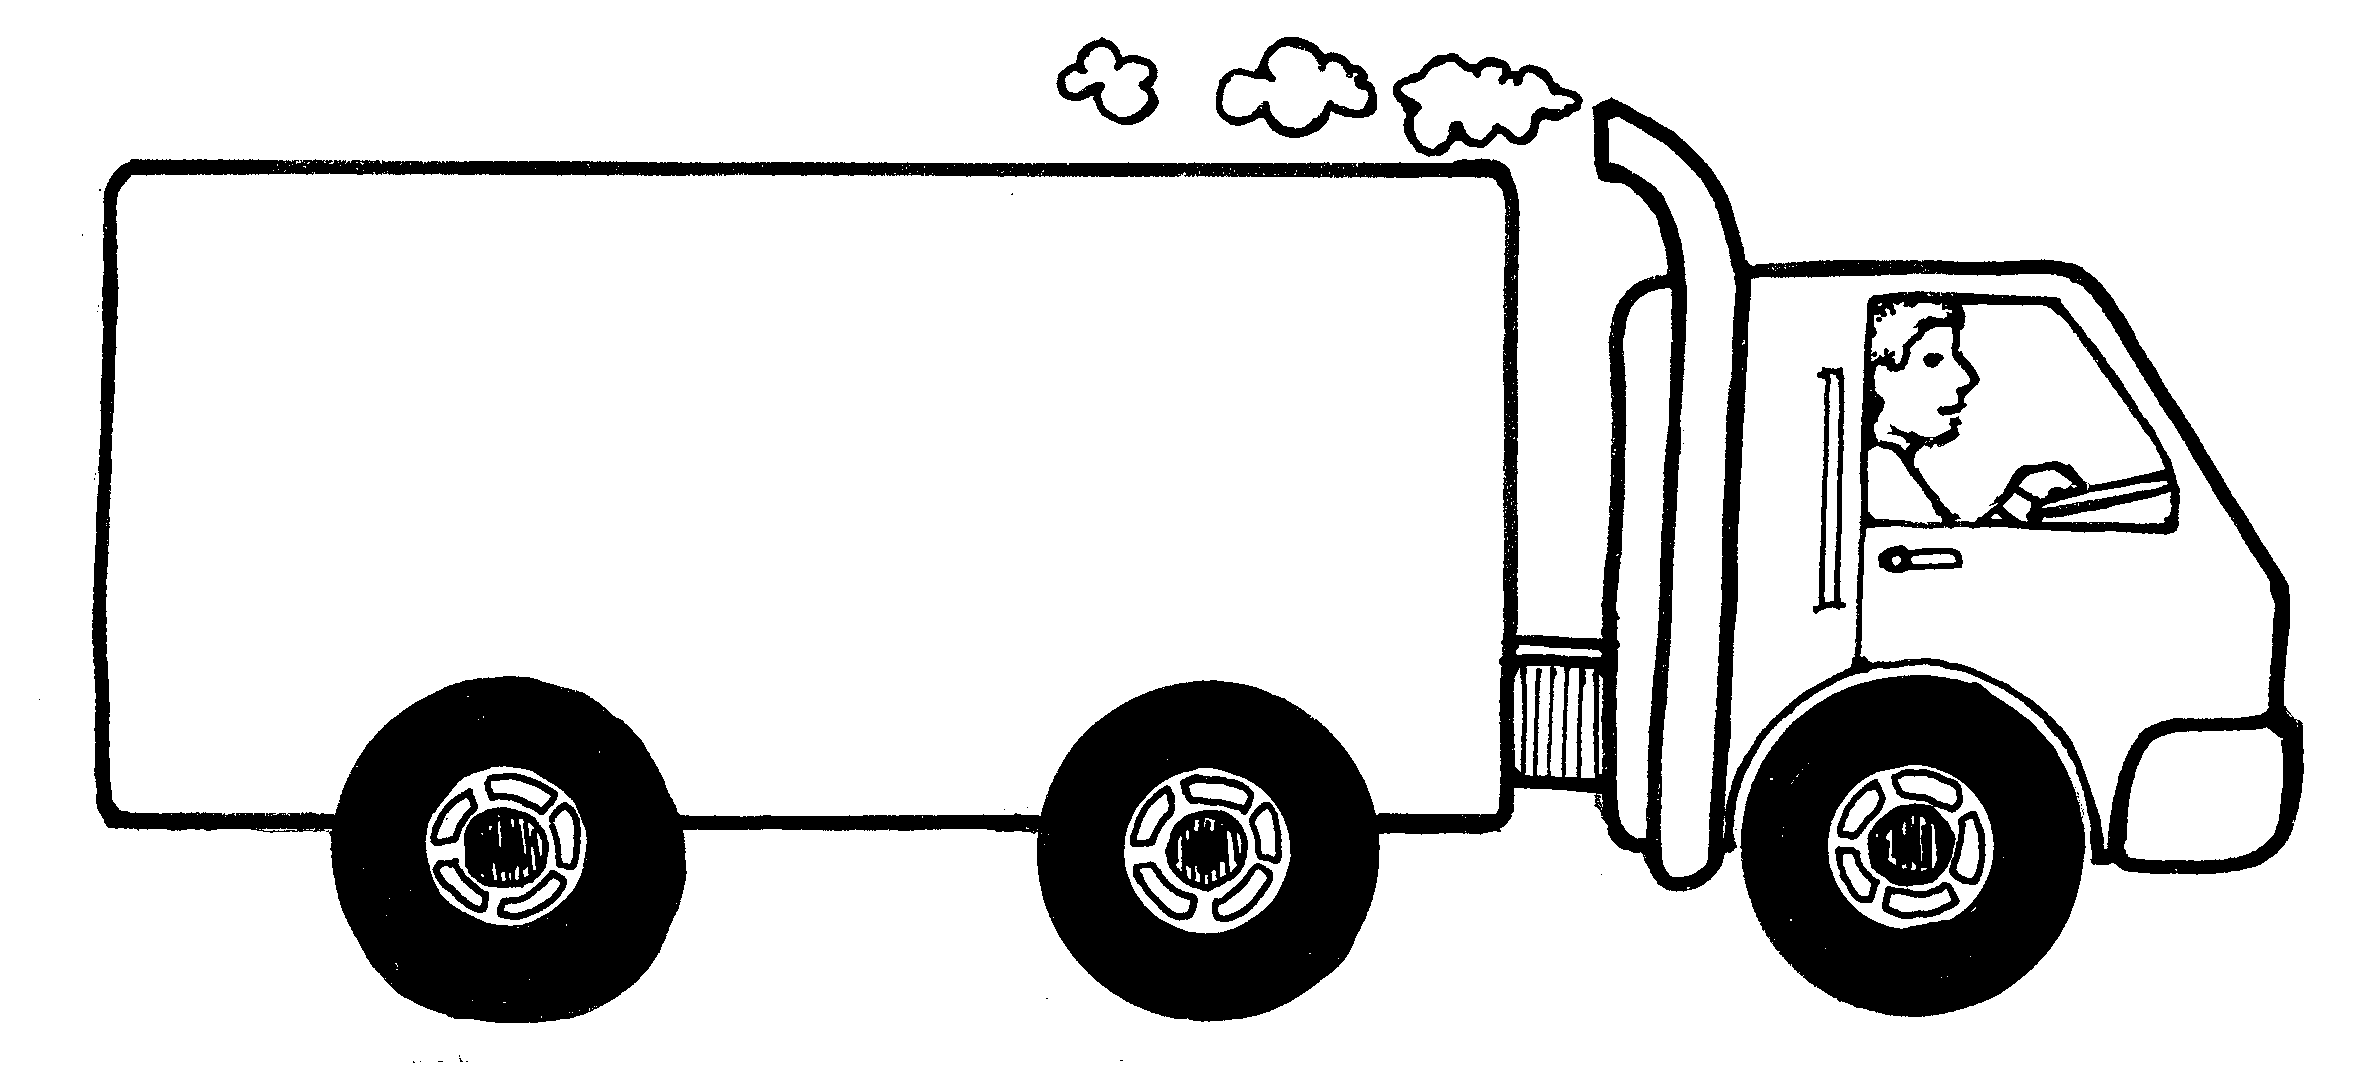 Dump truck clipart black and white free clipart 2